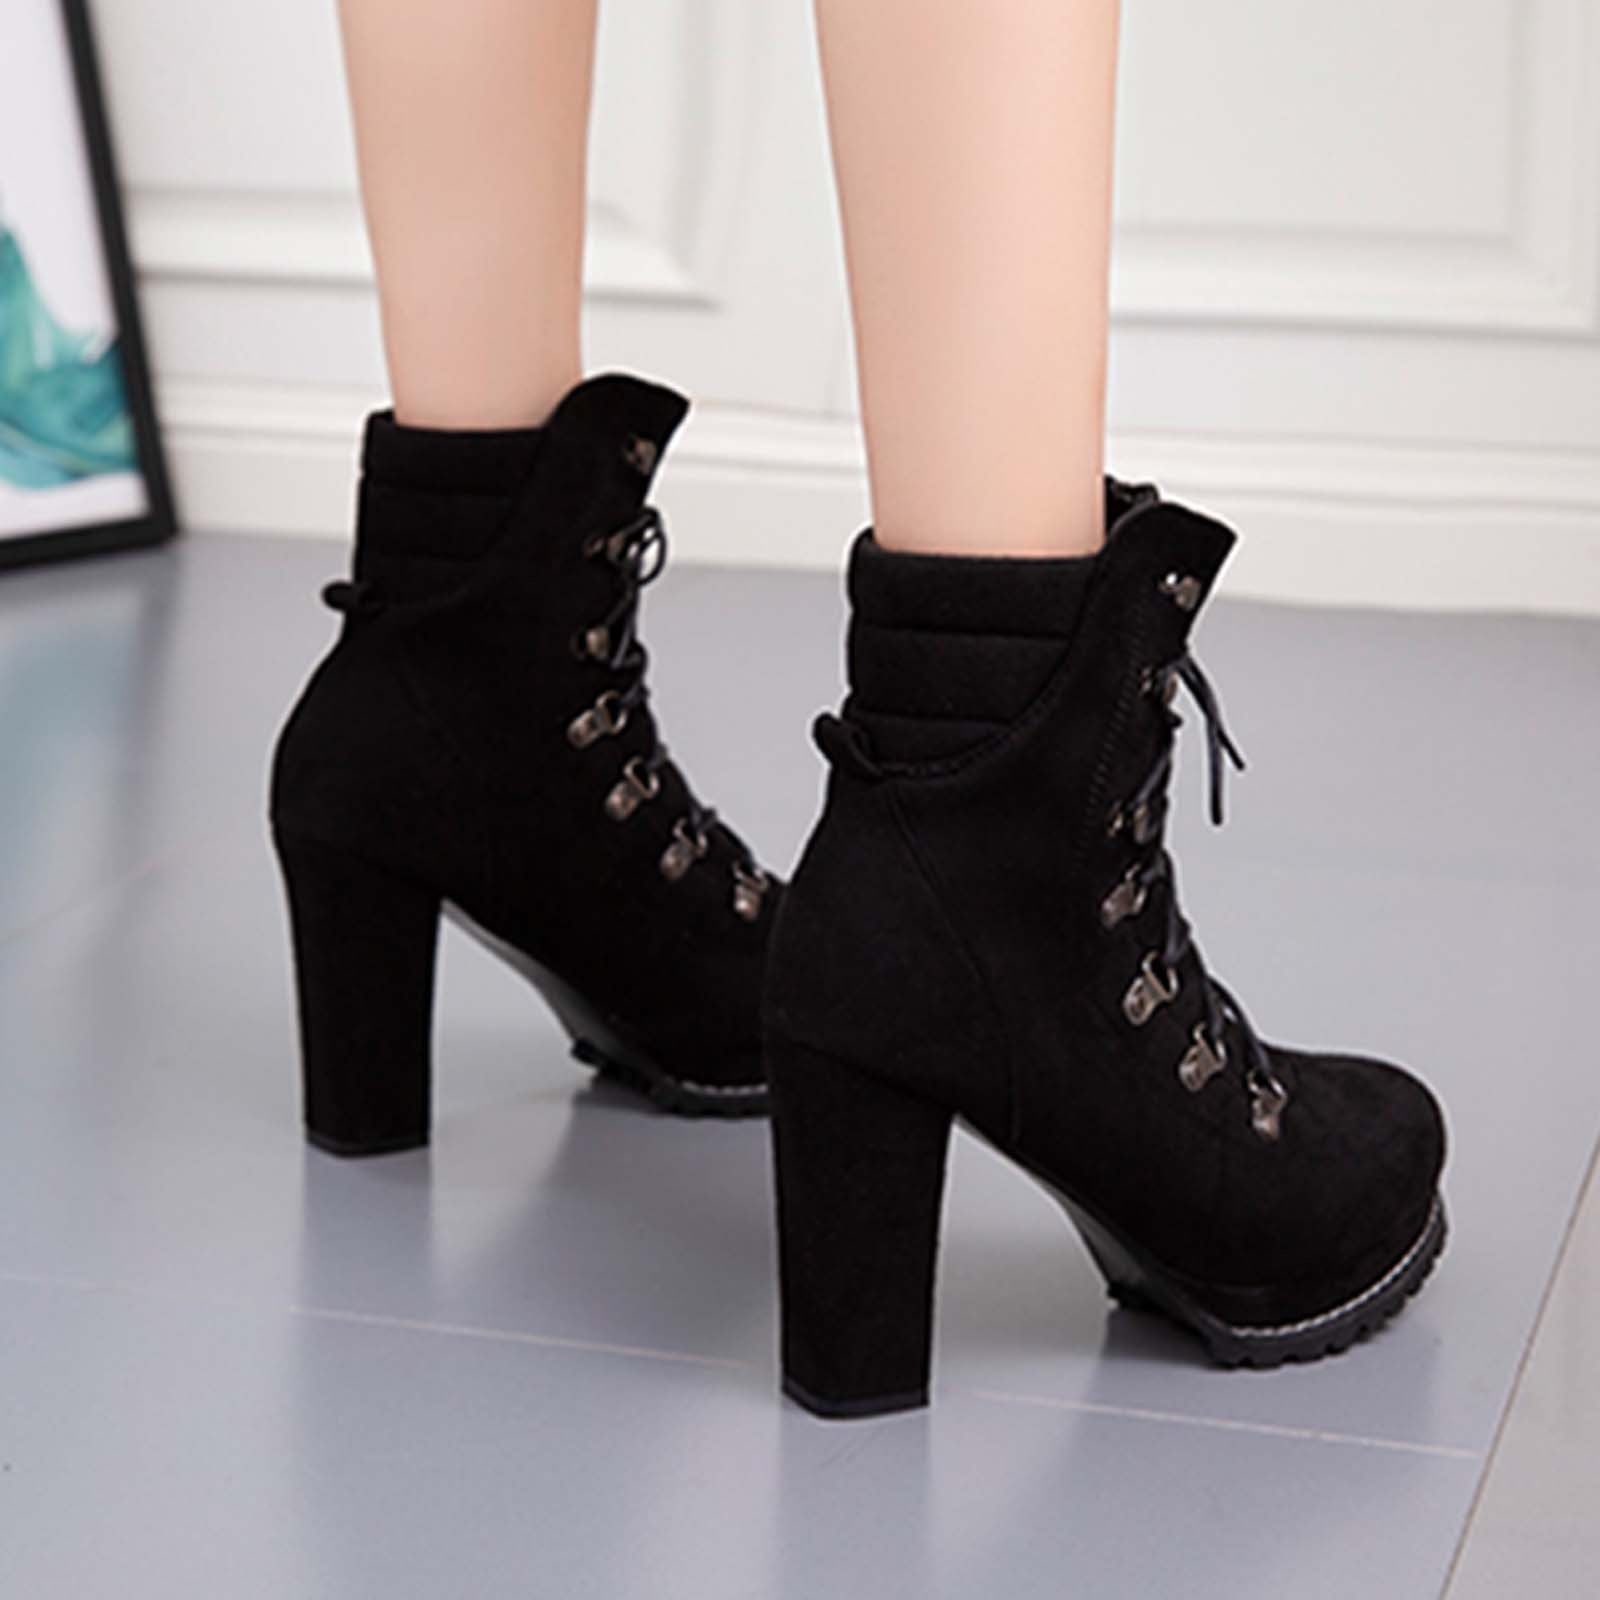 Graceland) Black Lace Up Heeled Ankle Boot in Black | DEICHMANN